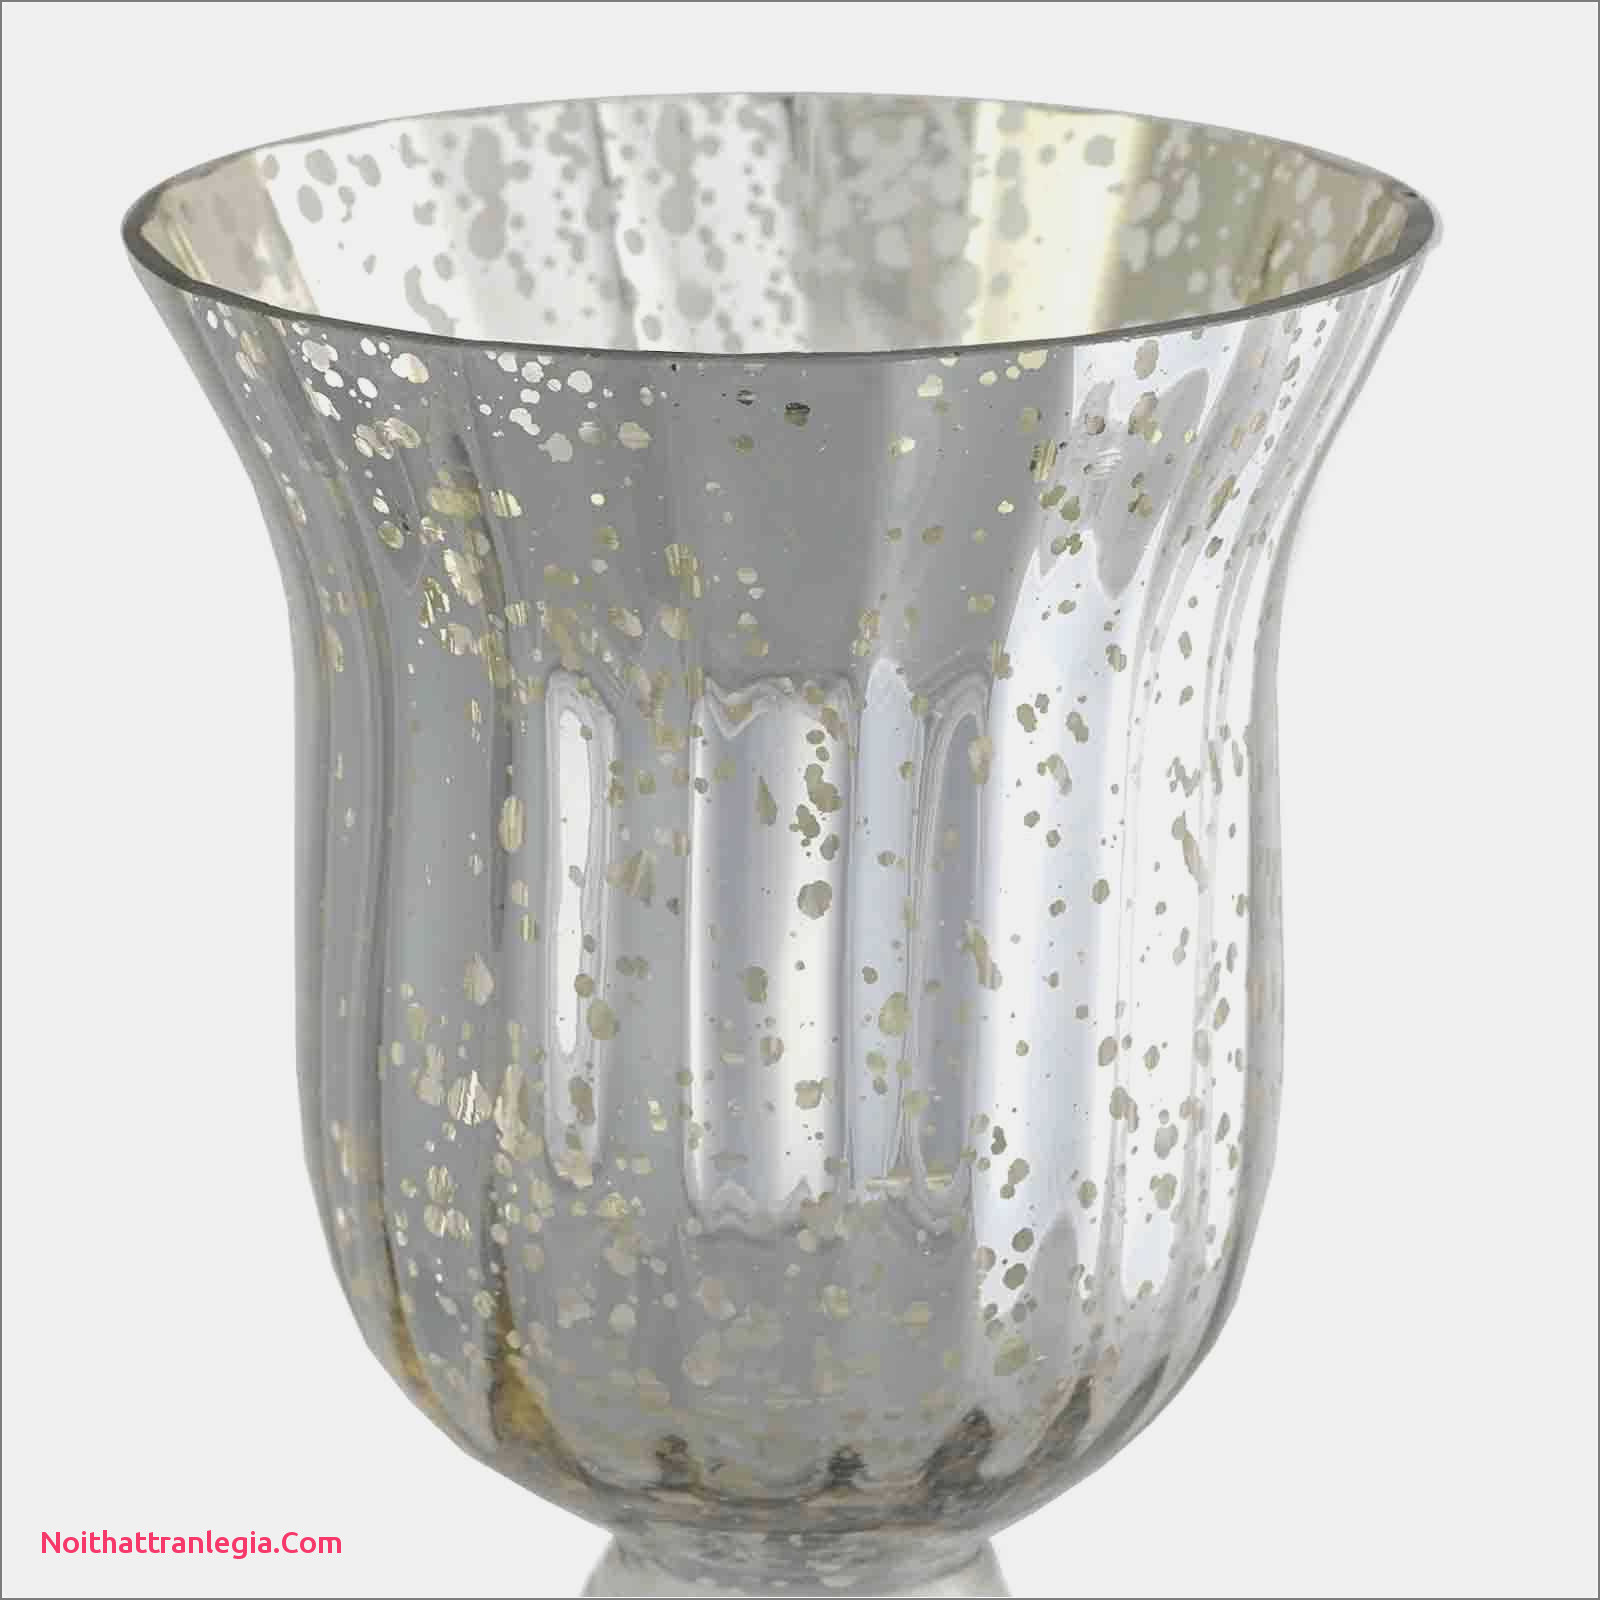 15 Recommended Waterford Blue Crystal Vase 2024 free download waterford blue crystal vase of 20 wedding vases noithattranlegia vases design with wedding guest gift ideas inspirational candles for wedding favors superb pe s5h vases candle vase i